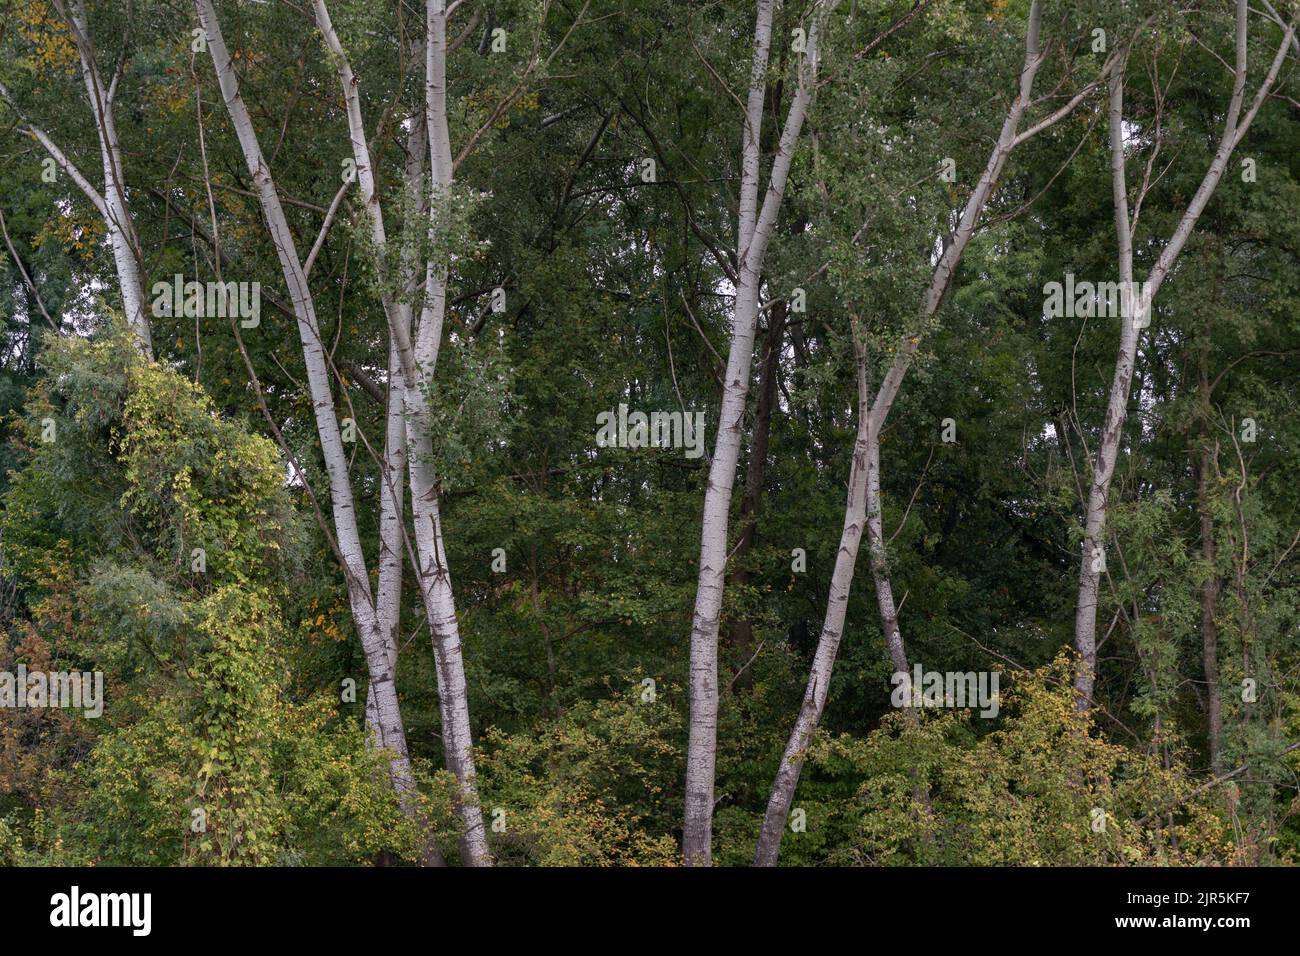 European poplar trees with a silver bark color at the edge of the forest in early autumn Stock Photo